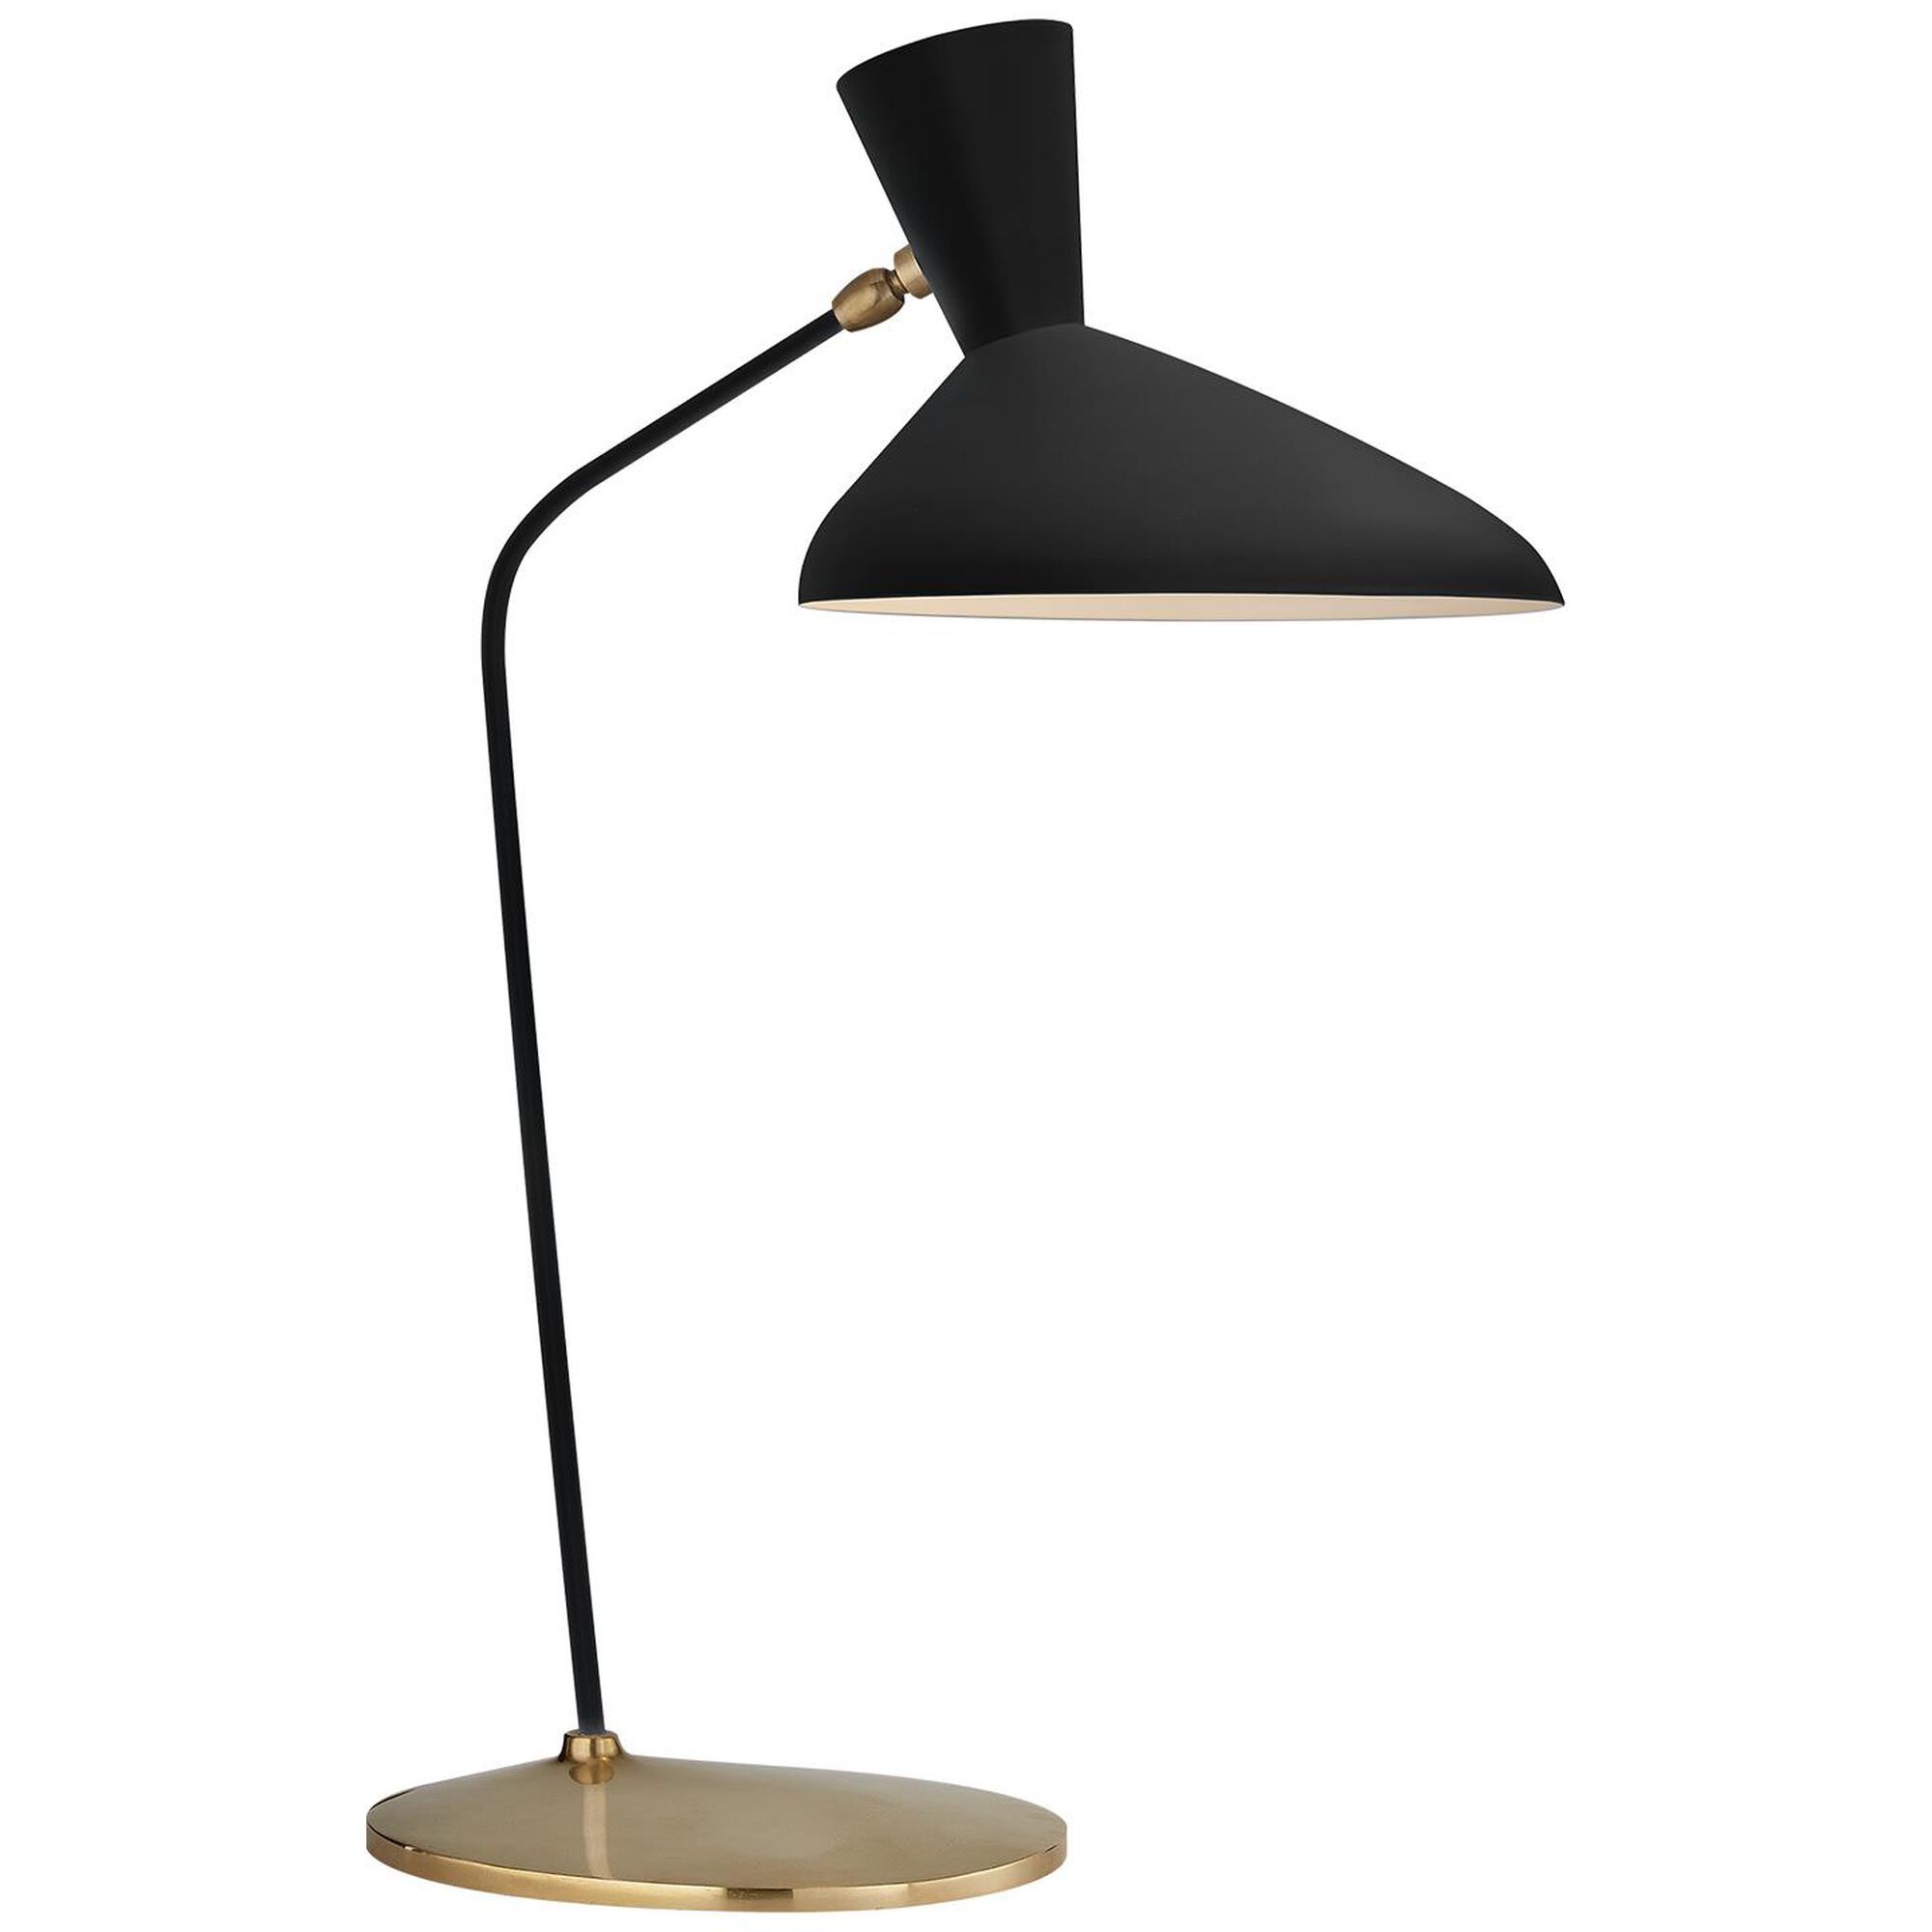 Aerin Austen 25 Inch Desk Lamp by Visual Comfort and Co. | Capitol Lighting 1800lighting.com